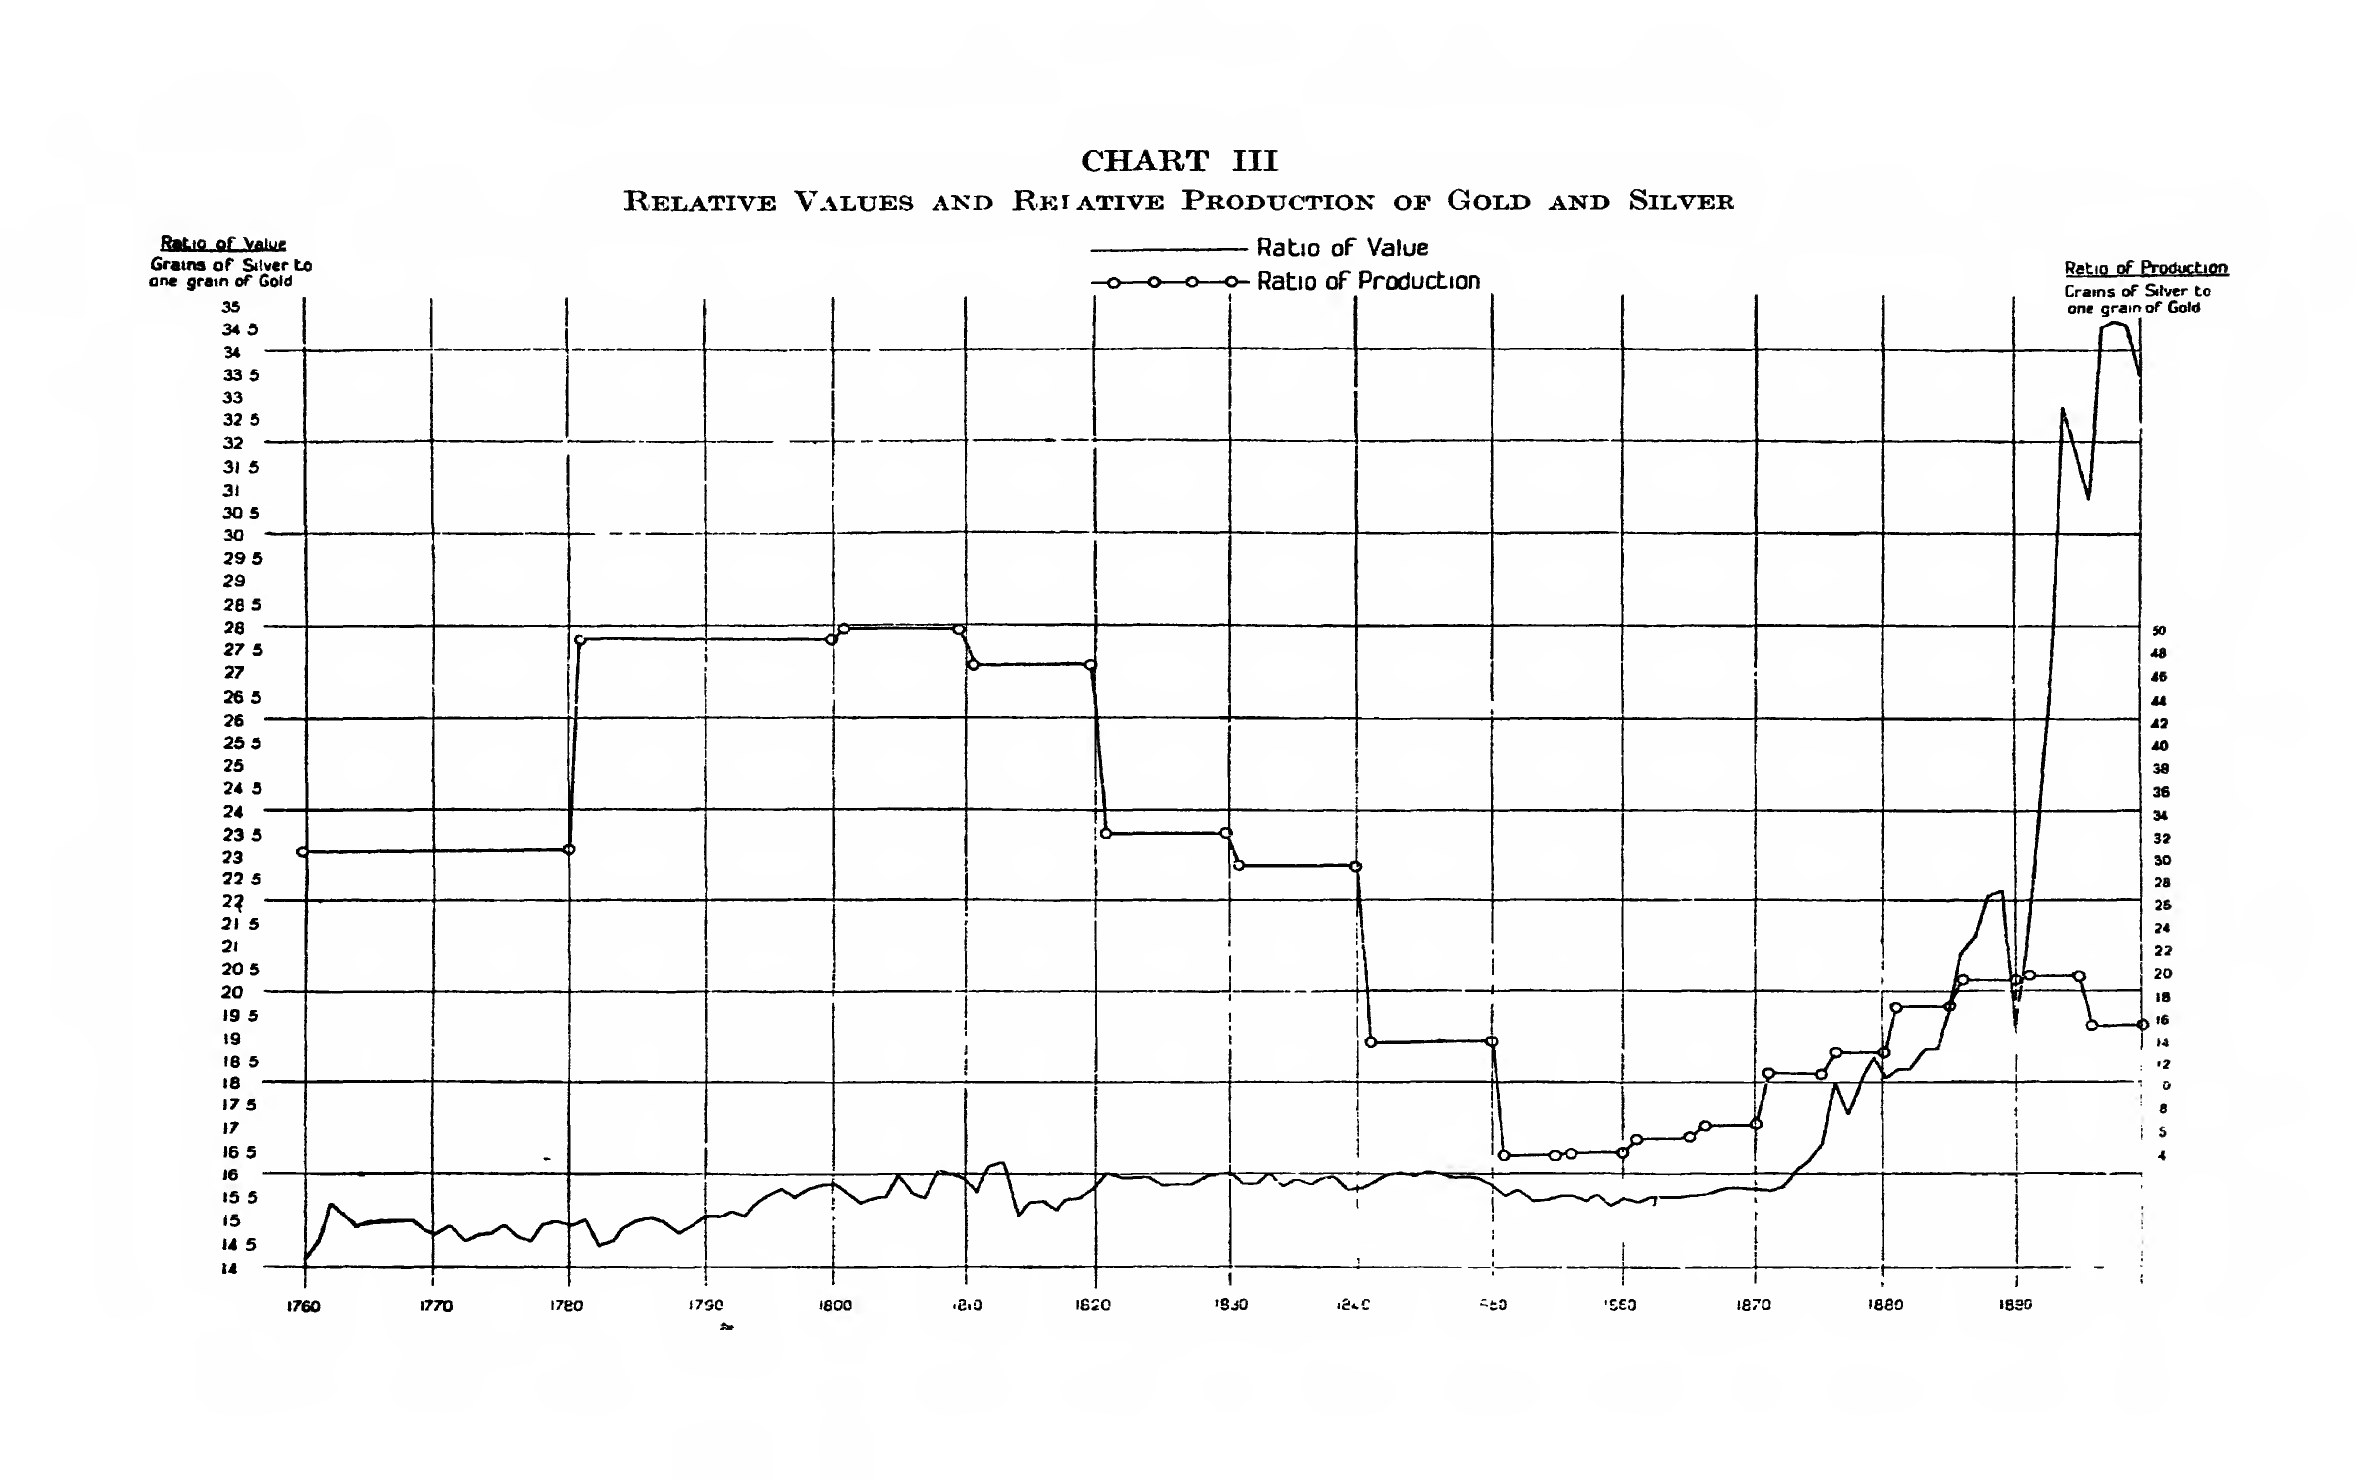 CHART III Relative Values and Relative Production of Gold and Silver